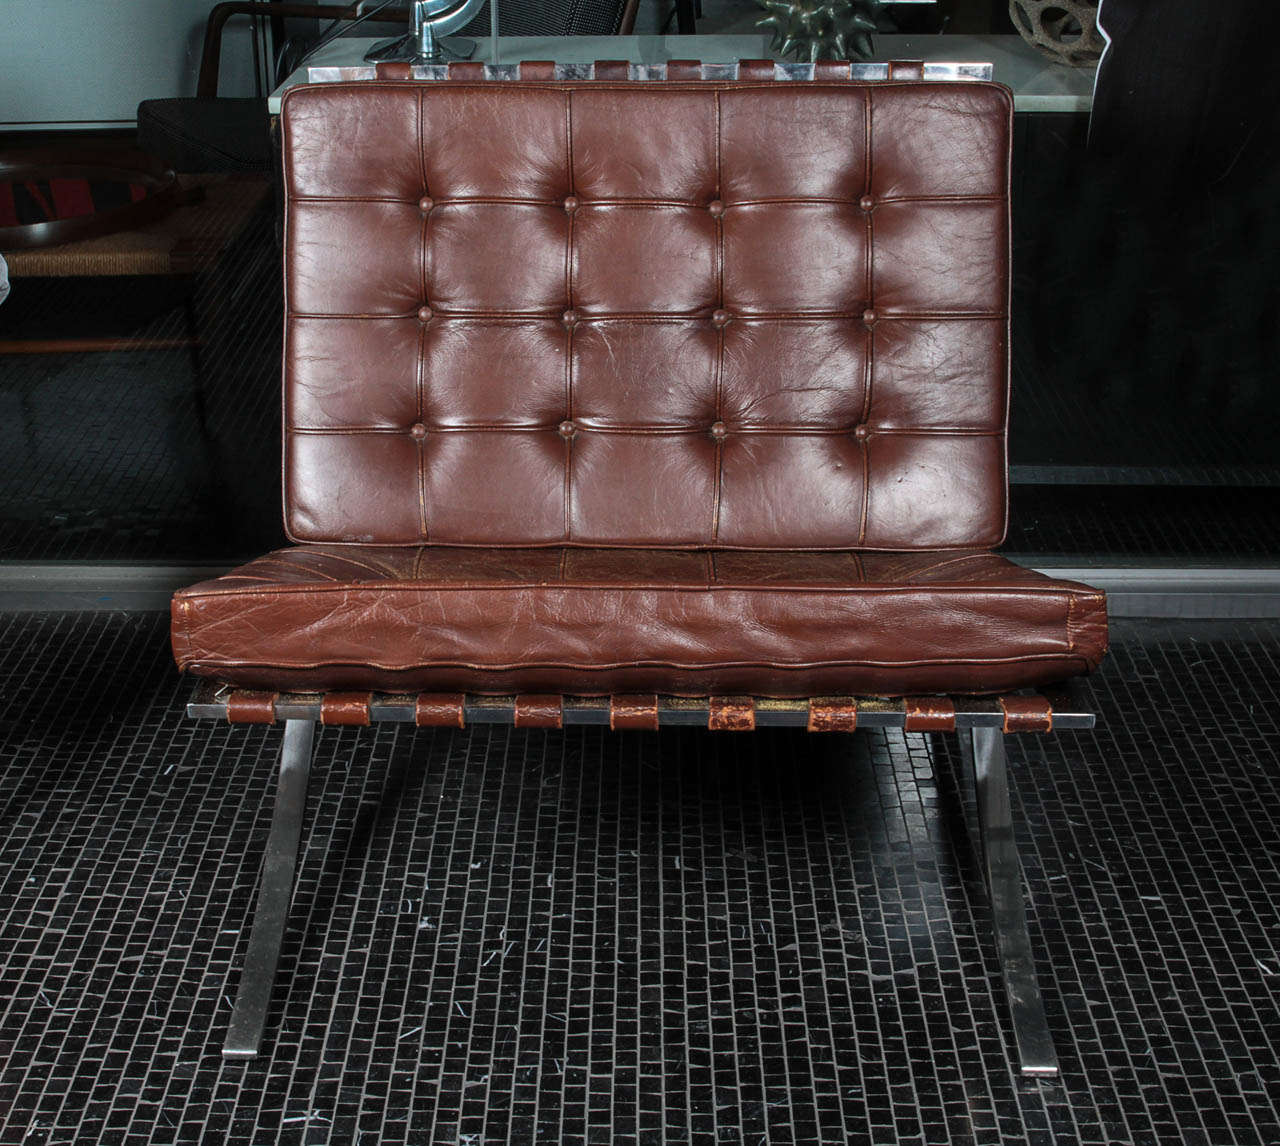 Classic brown leather Barcelona chair by Ludwig Mies van der Rohe, manufactured by Knoll, 1950s.